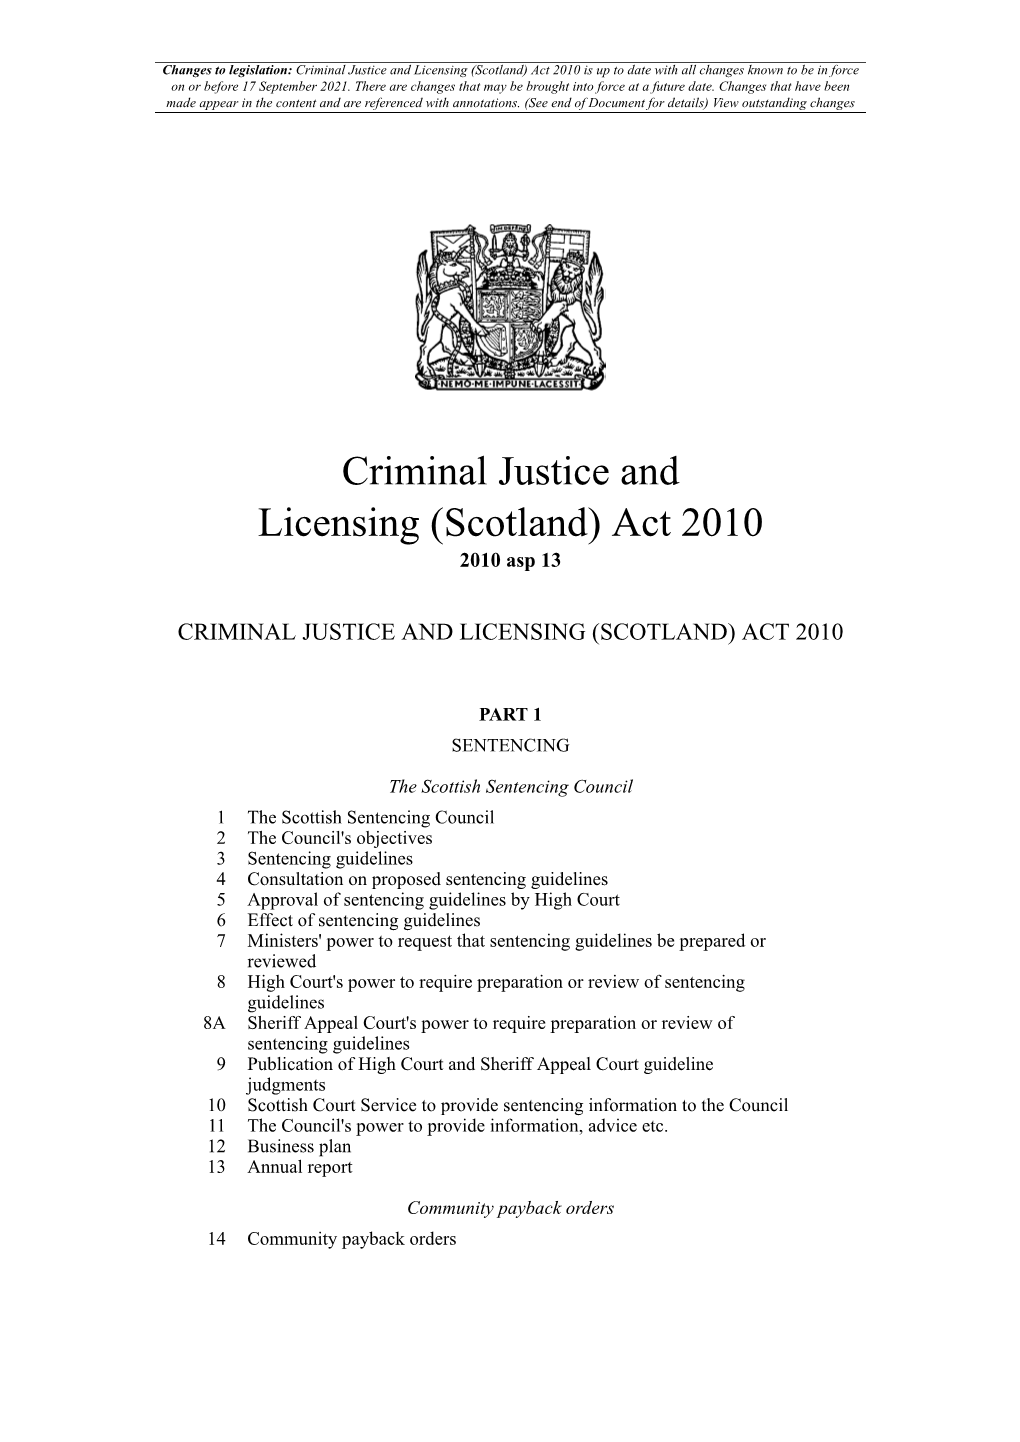 Criminal Justice and Licensing (Scotland) Act 2010 Is up to Date with All Changes Known to Be in Force on Or Before 17 September 2021